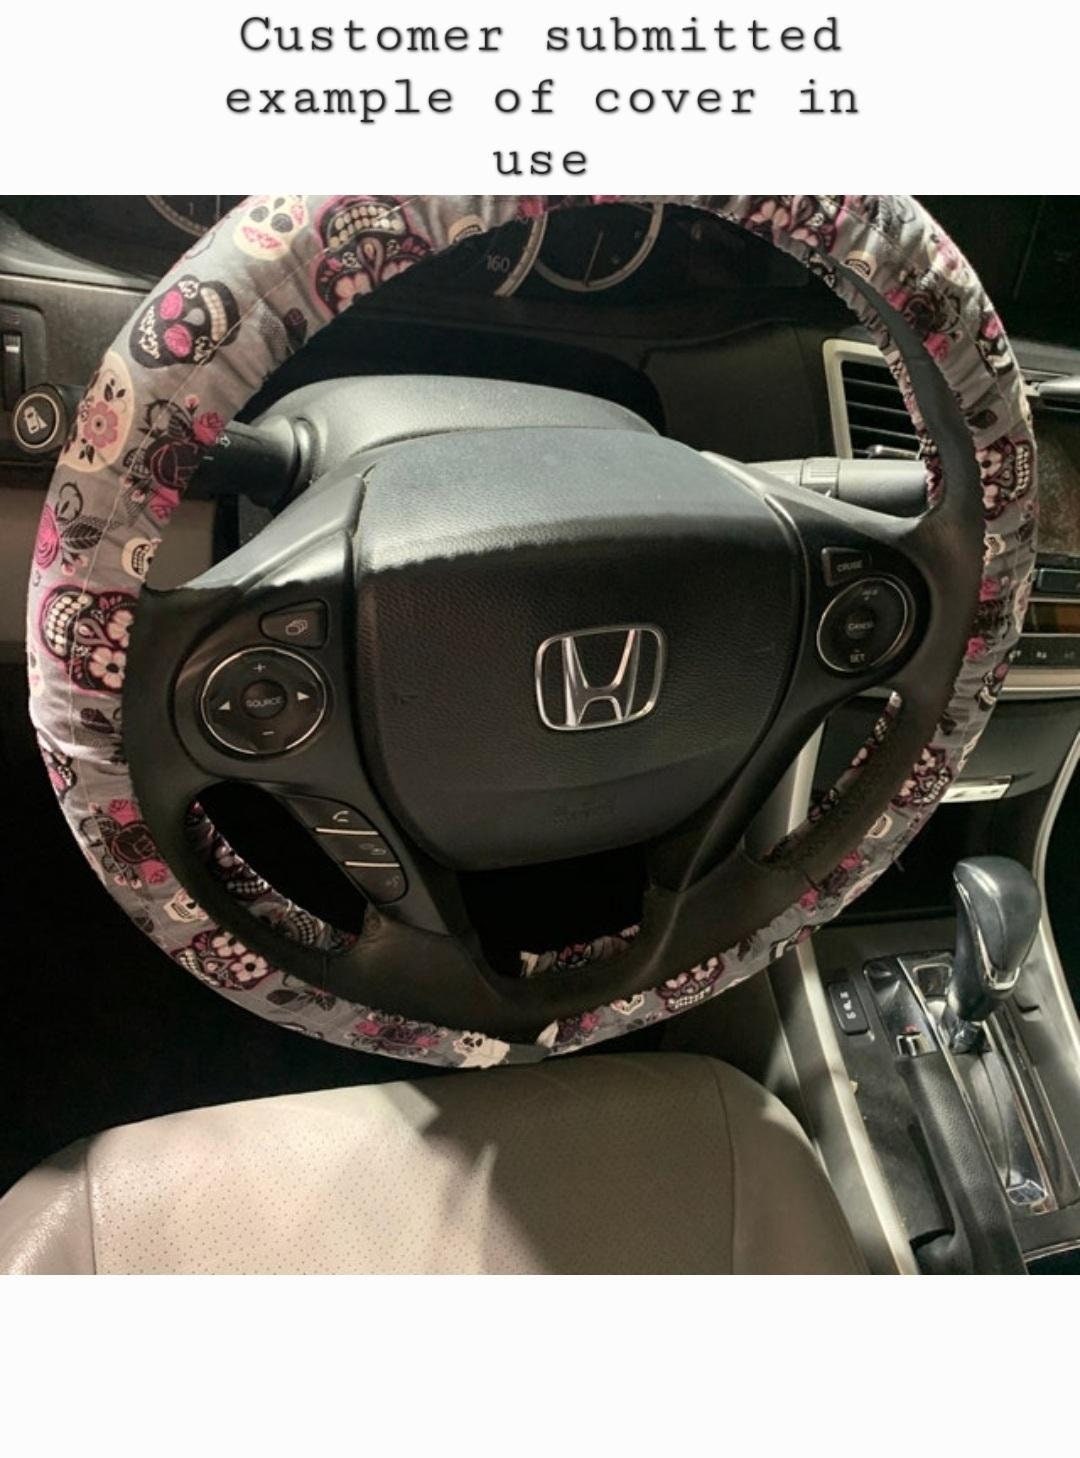 Steering Wheel Cover made with Licensed HP Fabric, 100% Cotton, Washable, Custom Car Accessories - Harlow's Store and Garden Gifts